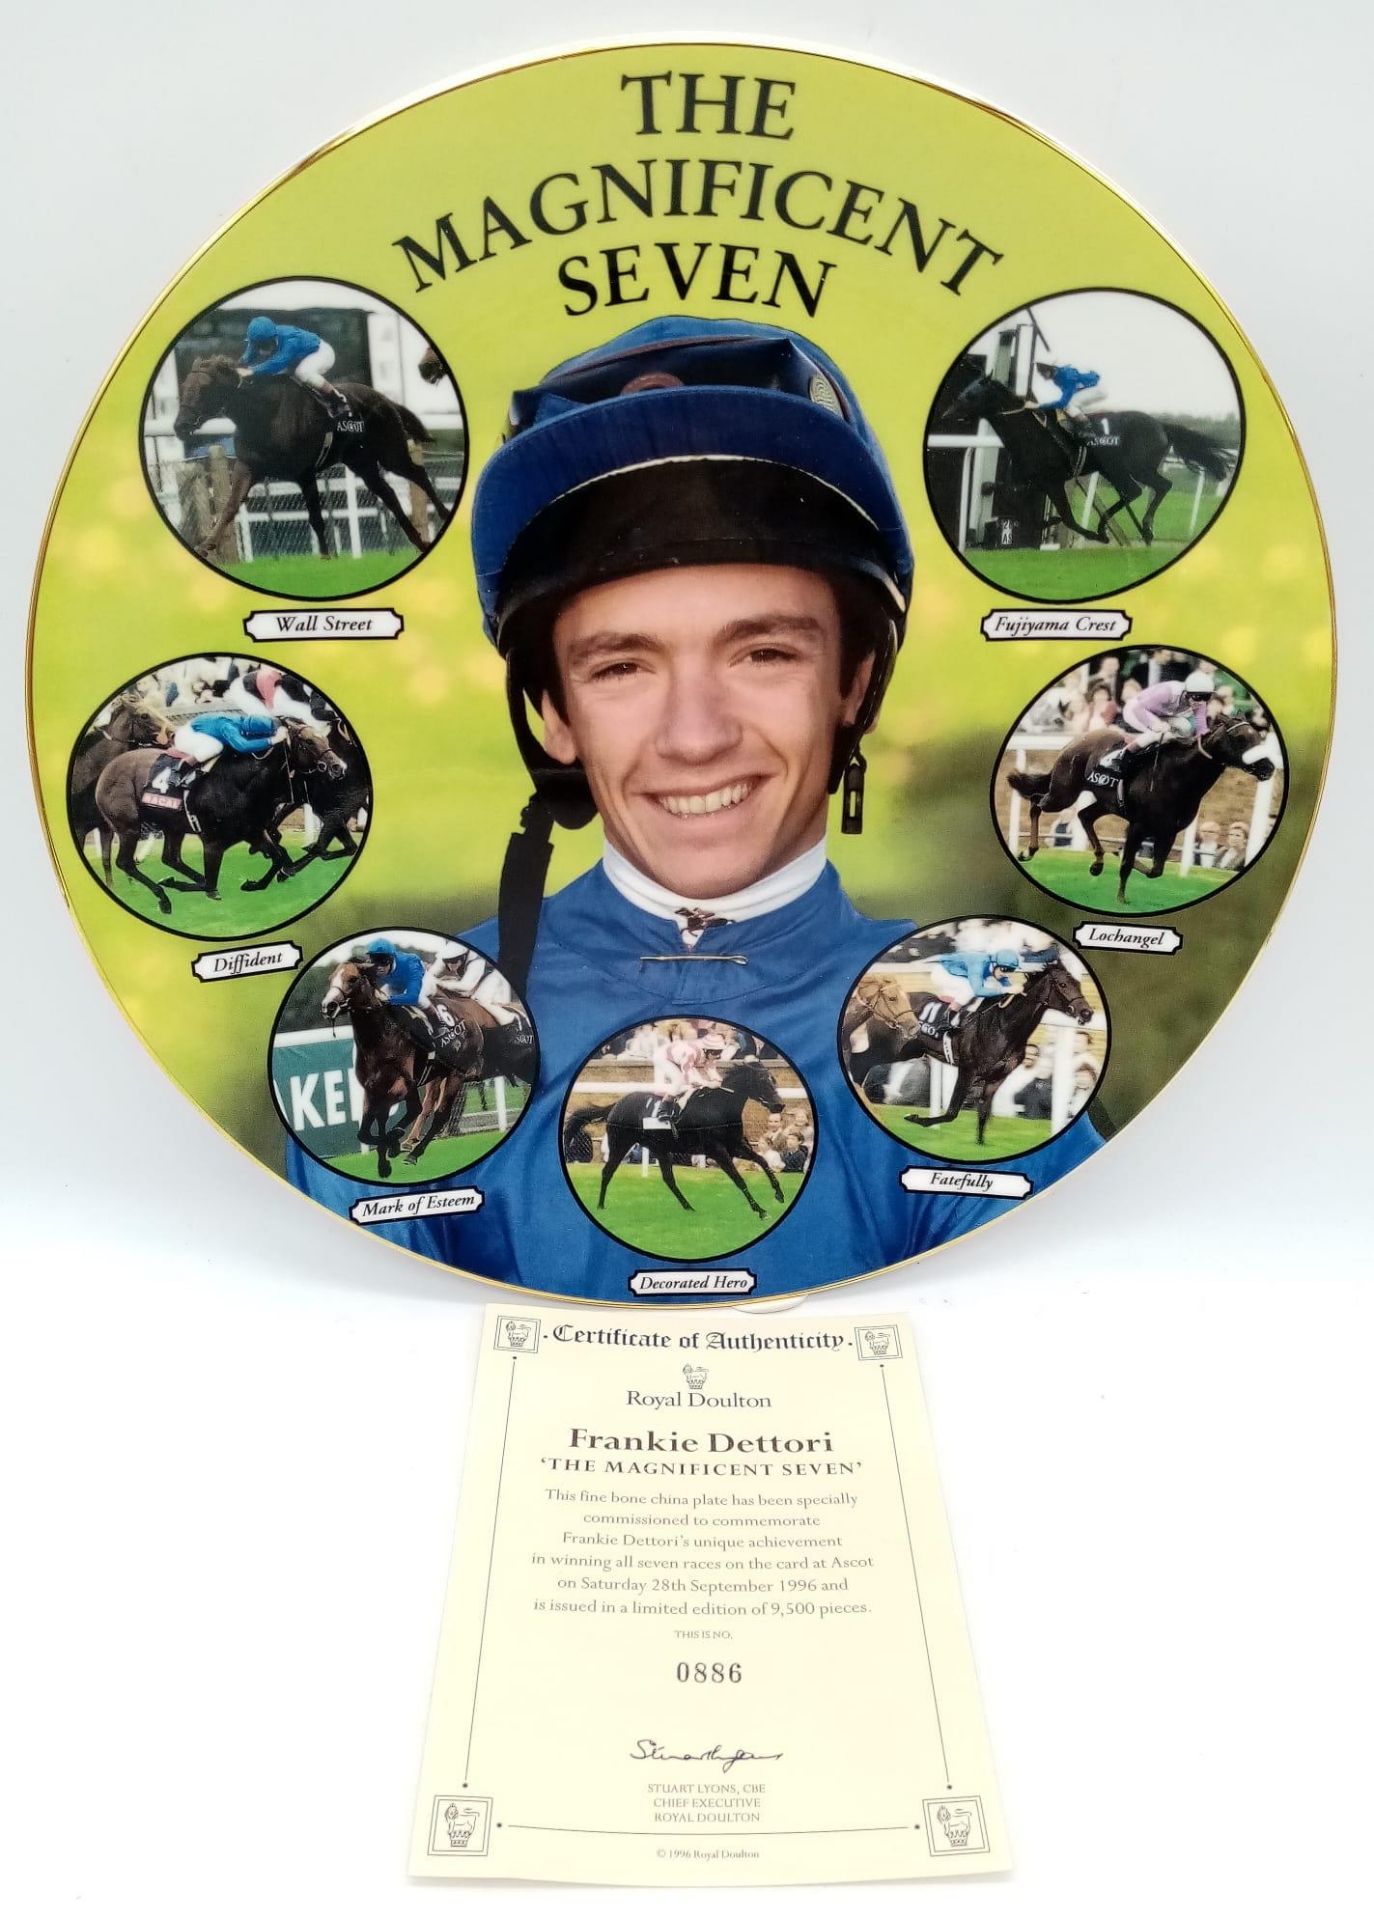 A treat for any thoroughbred racing fans. A superb limited edition Frankie Dettori 'Magnificent